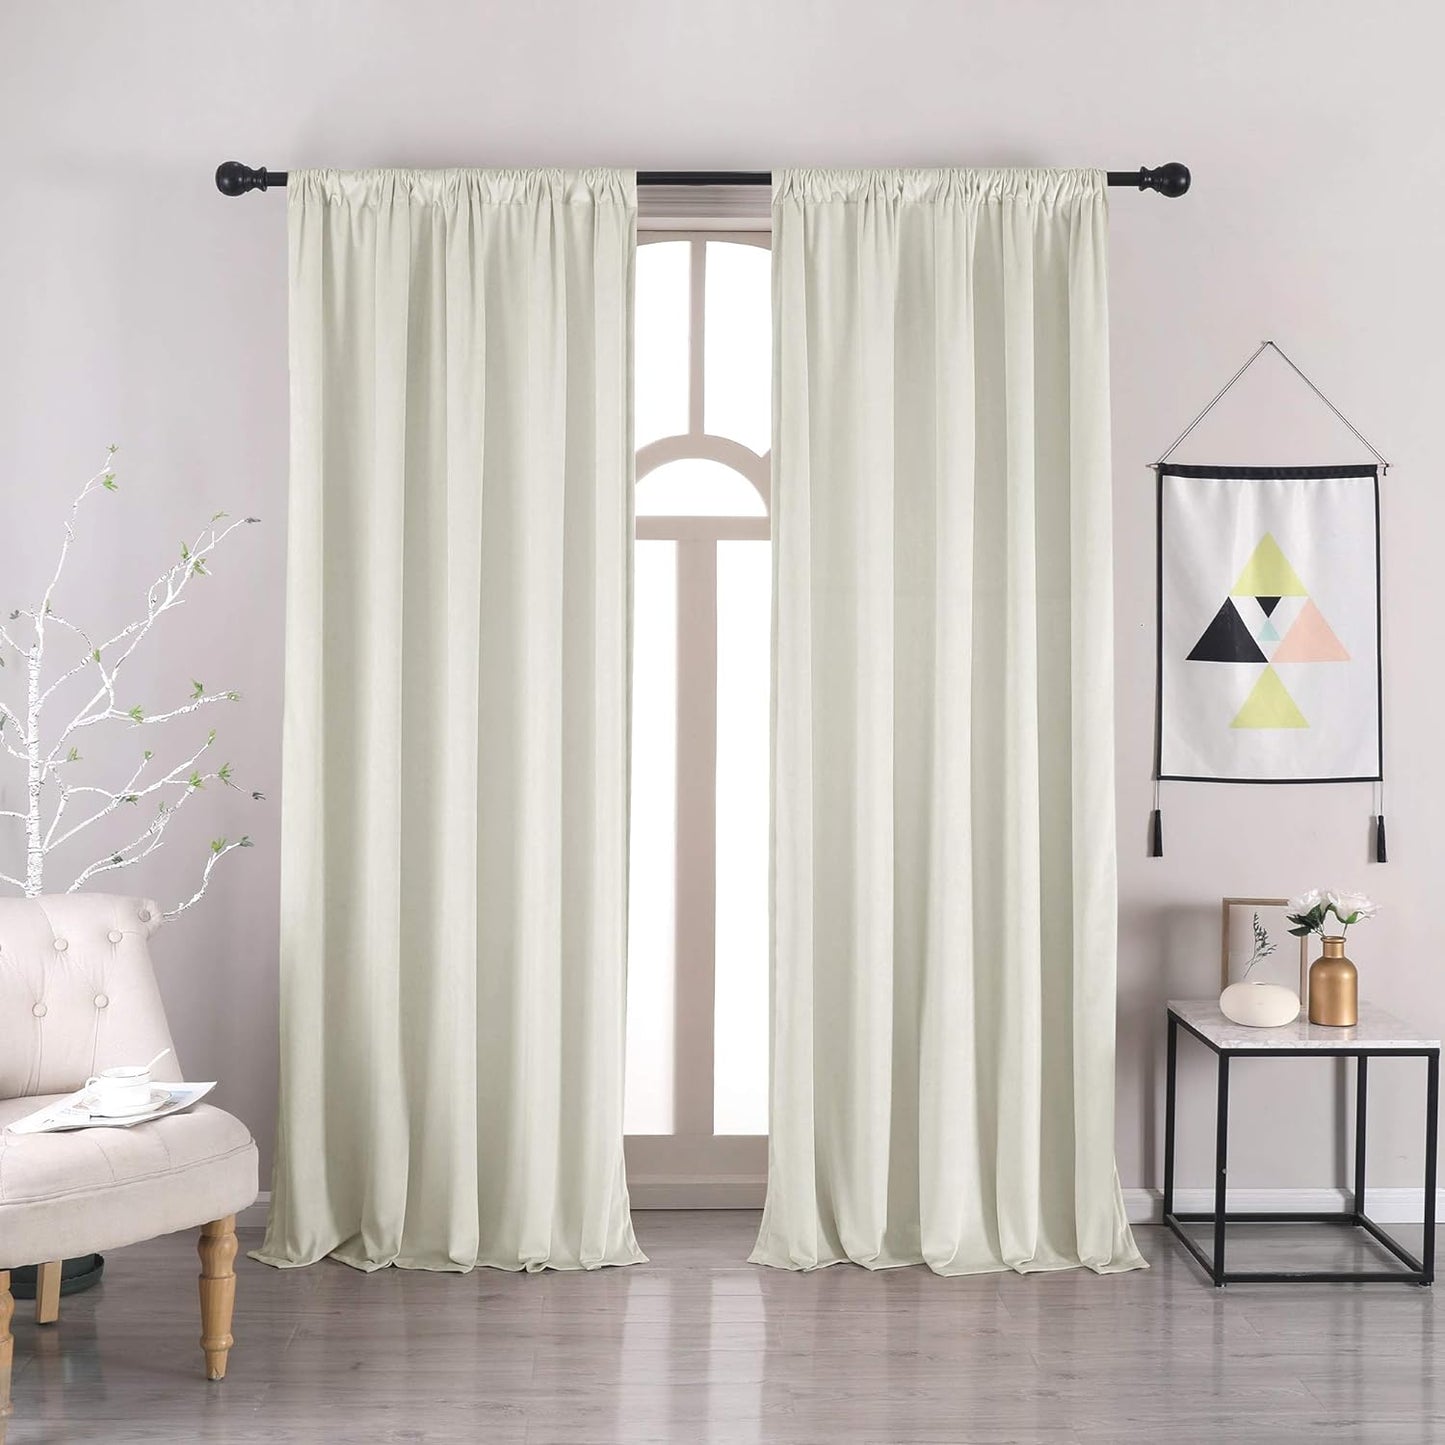 Nanbowang Green Velvet Curtains 63 Inches Long Dark Green Light Blocking Rod Pocket Window Curtain Panels Set of 2 Heat Insulated Curtains Thermal Curtain Panels for Bedroom  nanbowang Cream 42"X84" 